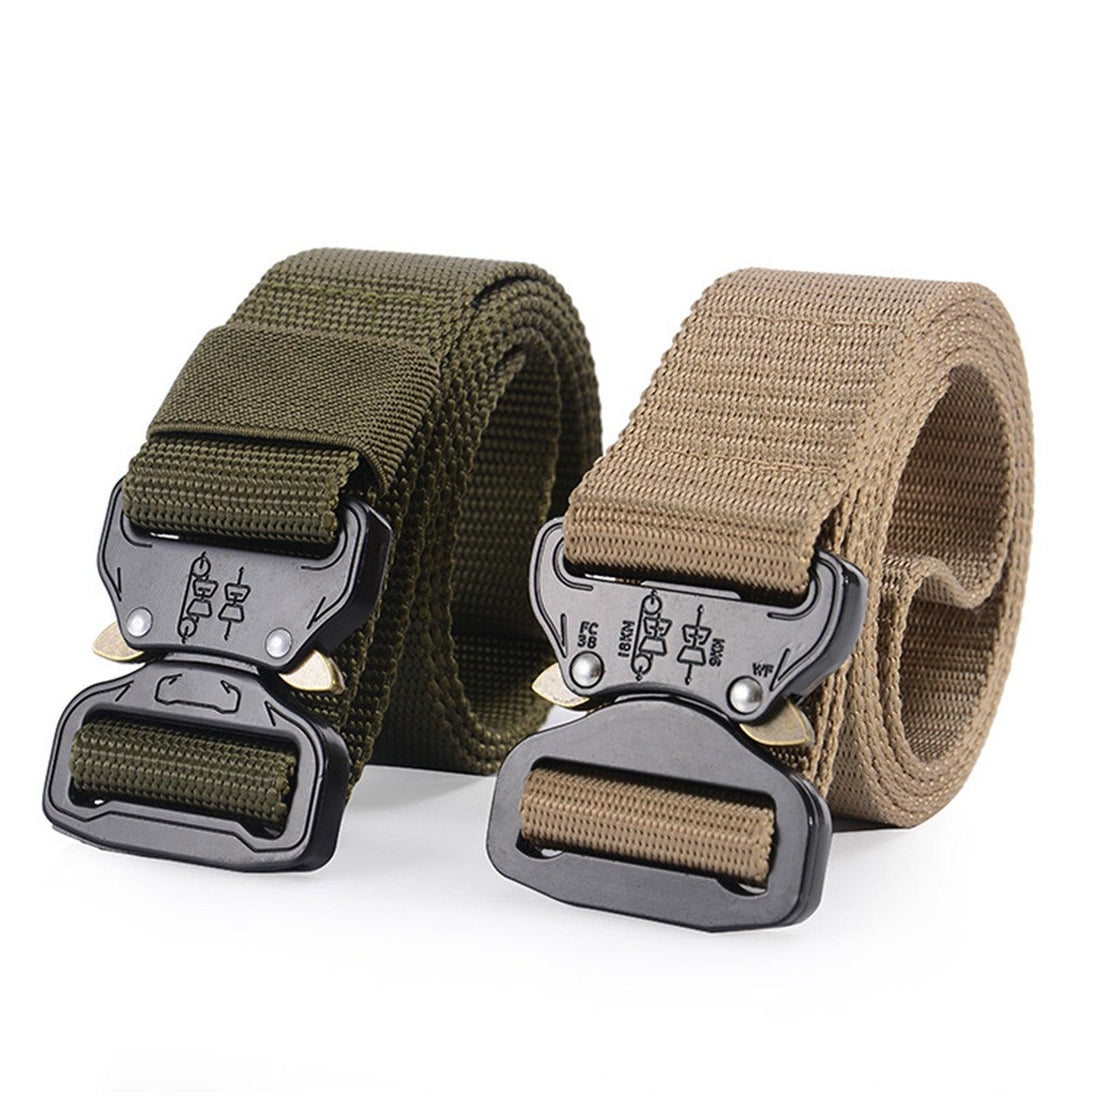 Buy Mountgear Multifunctional Men's Outdoor Tactical Belt Outside Military Training Belt discounted | Products On Sale Australia